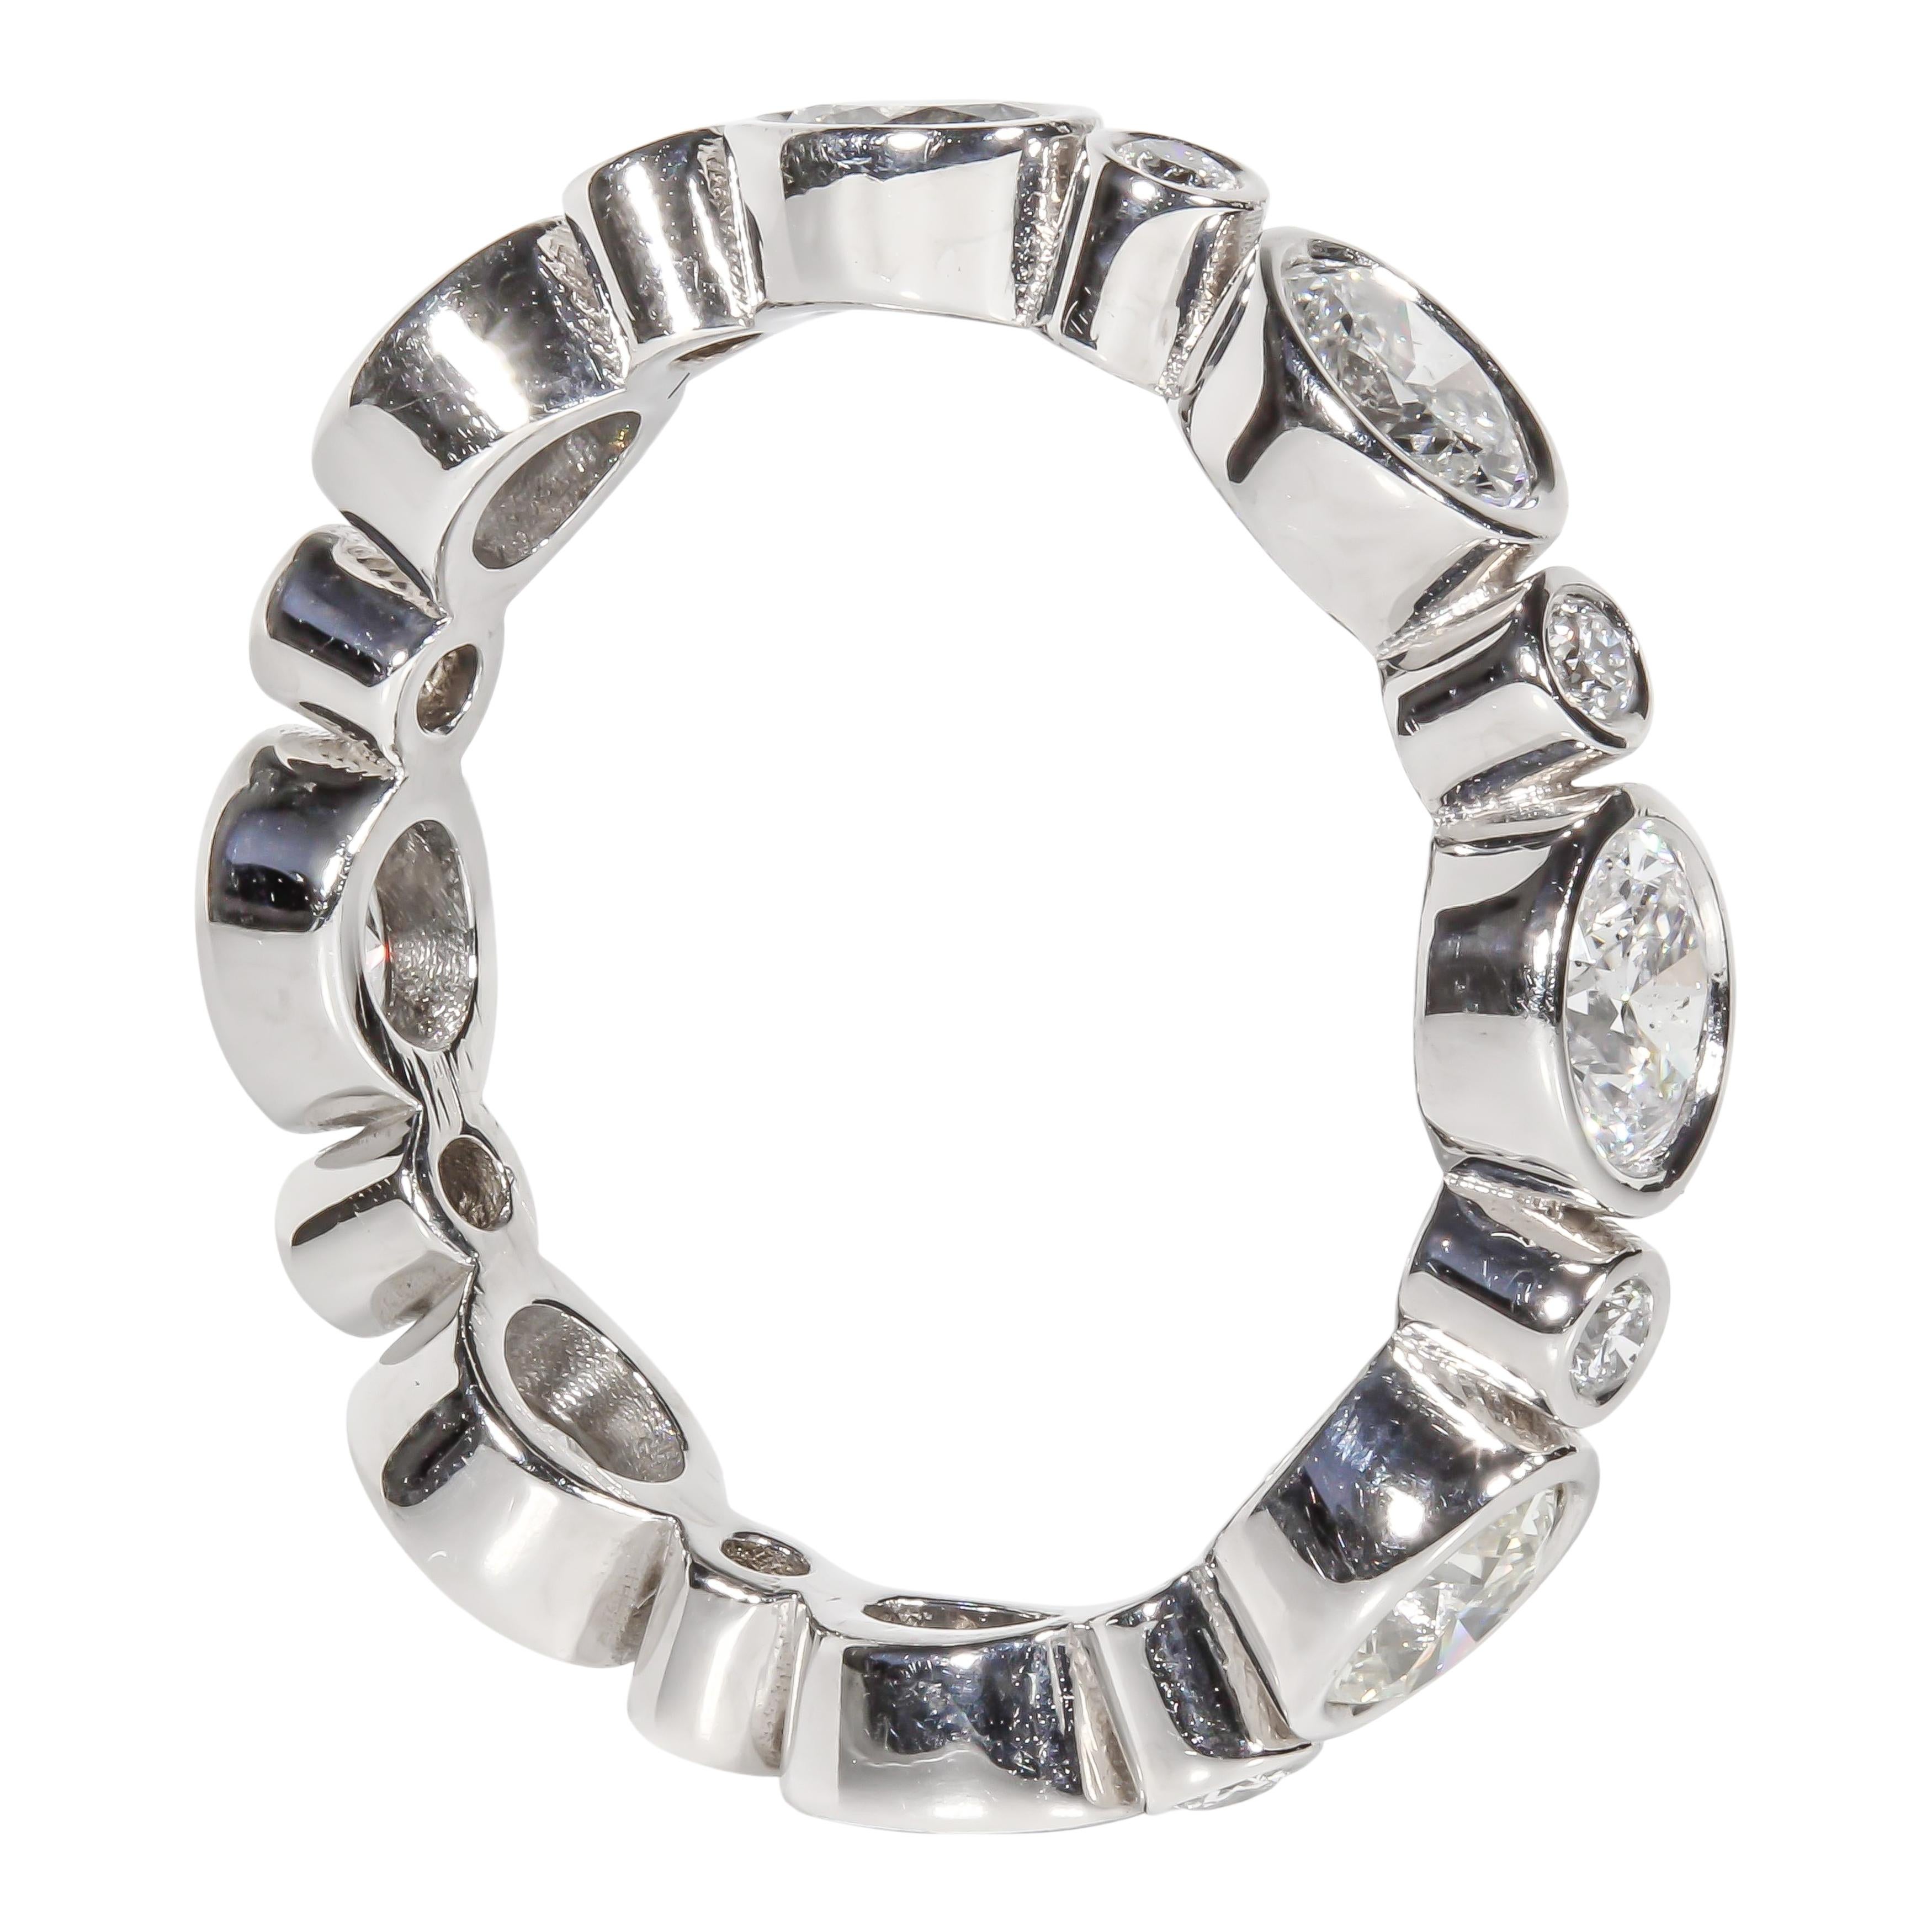 14 karat white gold eternity band ring containing 1.85 carats of bezel set oval brilliant and 0.22 carats of round brilliant natural diamonds. The color and clarity grades of the diamonds have been graded internally as F-G, VS1-SI1 for the oval